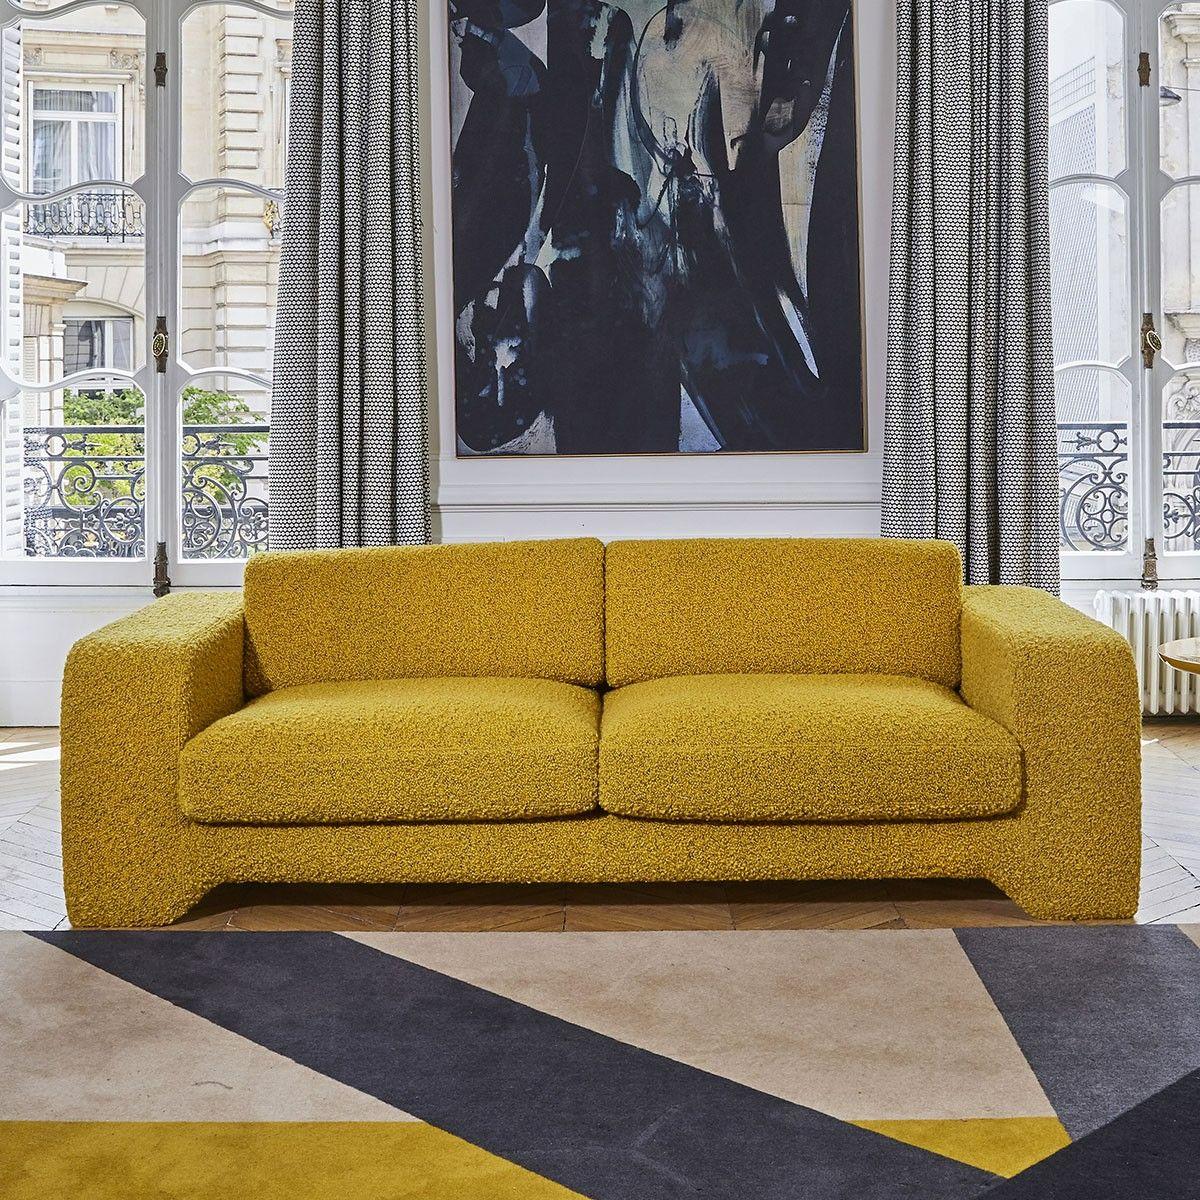 Popus Editions Giovanna 3 seater sofa in Curry Cork Linen Upholstery

Giovanna is a sofa with a strong profile. A sober, plush line, with this famous detail that changes everything, so as not to forget its strength of character and this charming